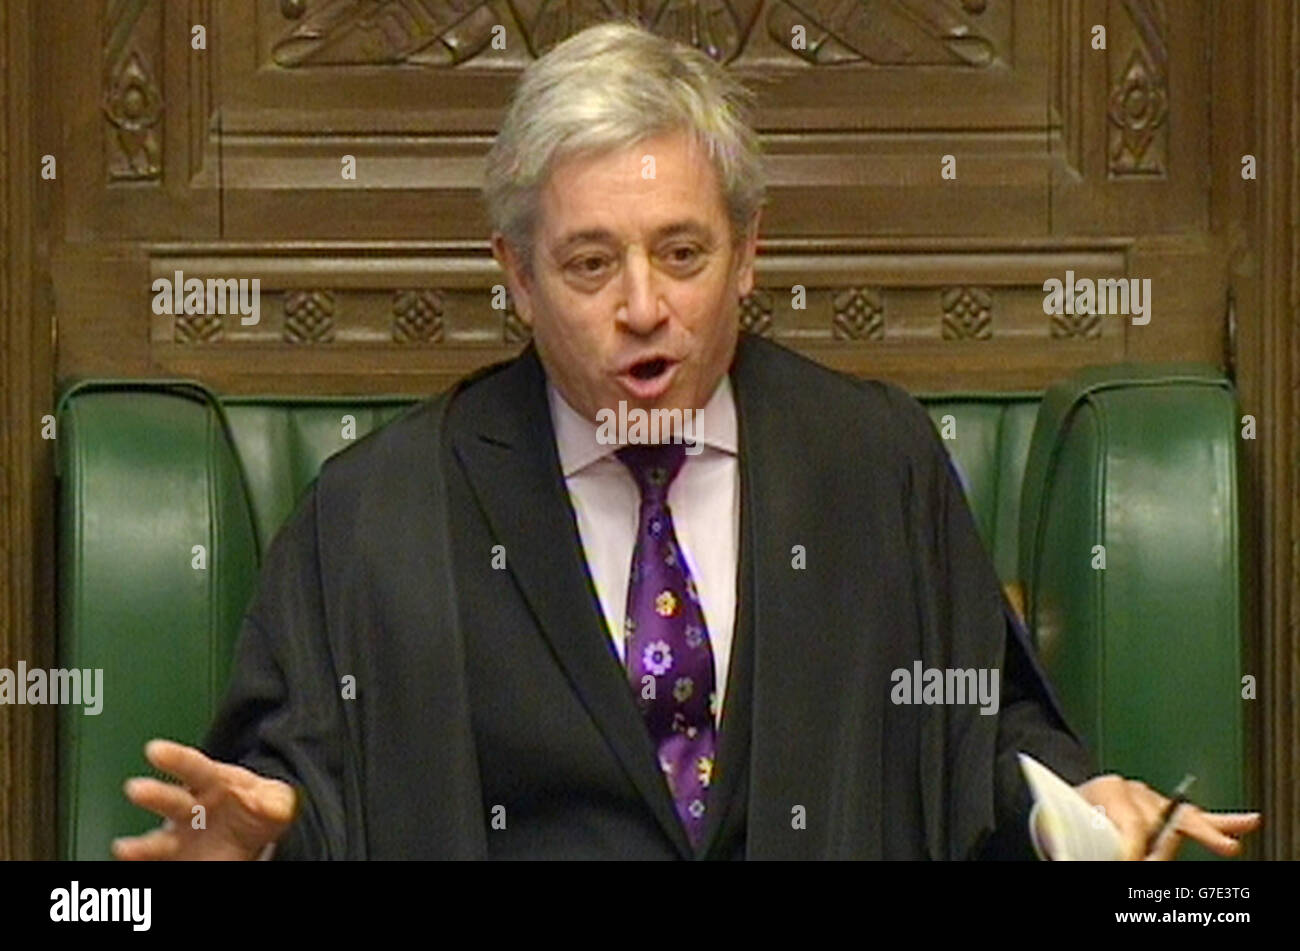 Commons Speaker John Bercow during Prime Minister's Questions in the House of Commons, London. Stock Photo